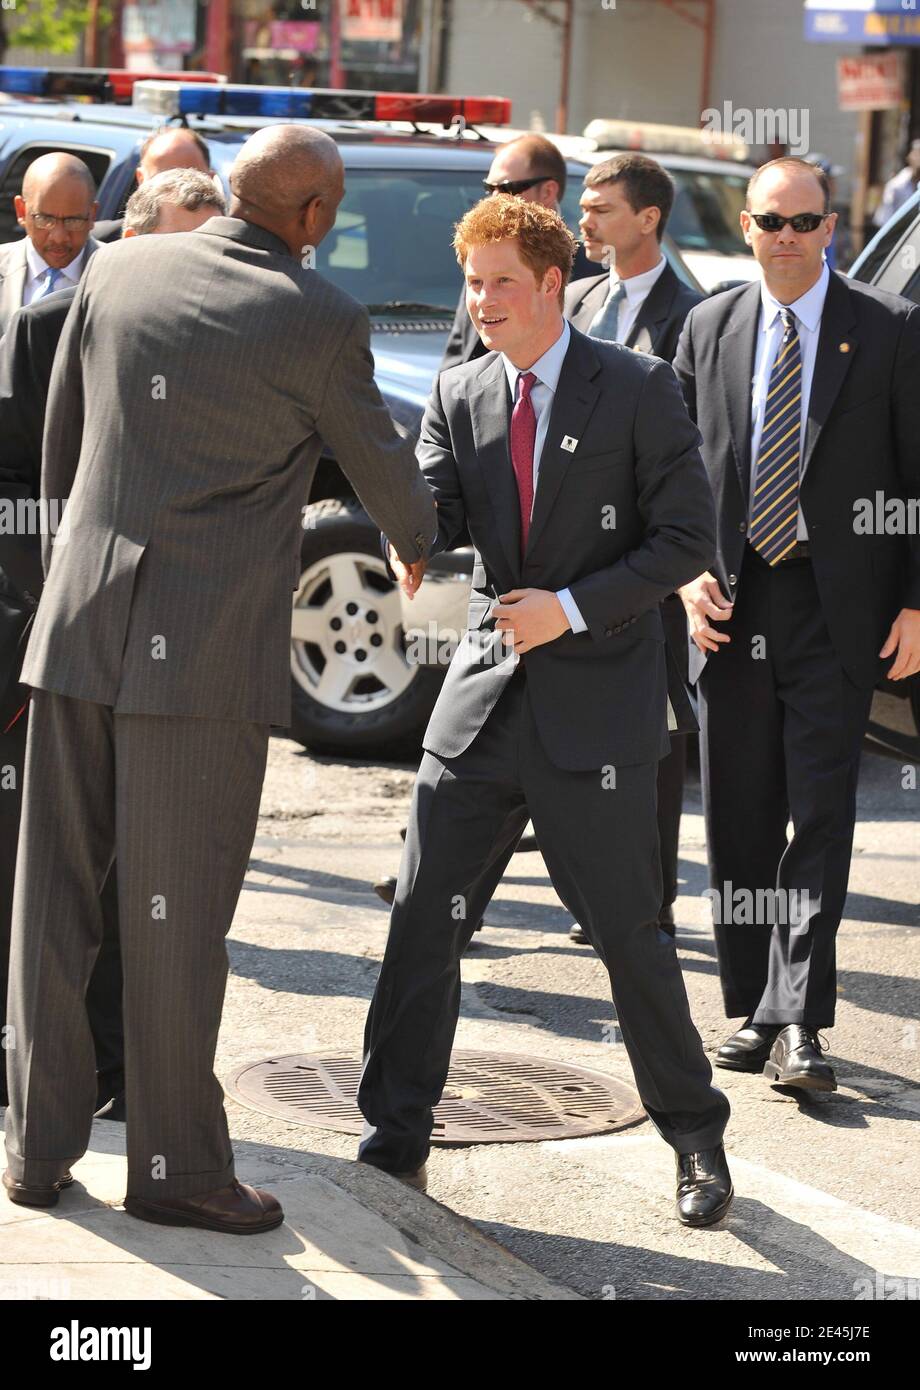 HRH Prince Harry arrives at the Harlem Children's zone school to meet children and view a range of facilities, at East Harlem, New York City, USA on May 30, 2009. He is greeted by Geoff Canada, CEO Harlem Children's Zone. Photo by S.Vlasic/ABACAPRESS.COM (Pictured: Prince Harry, Geoff Canada) Stock Photo